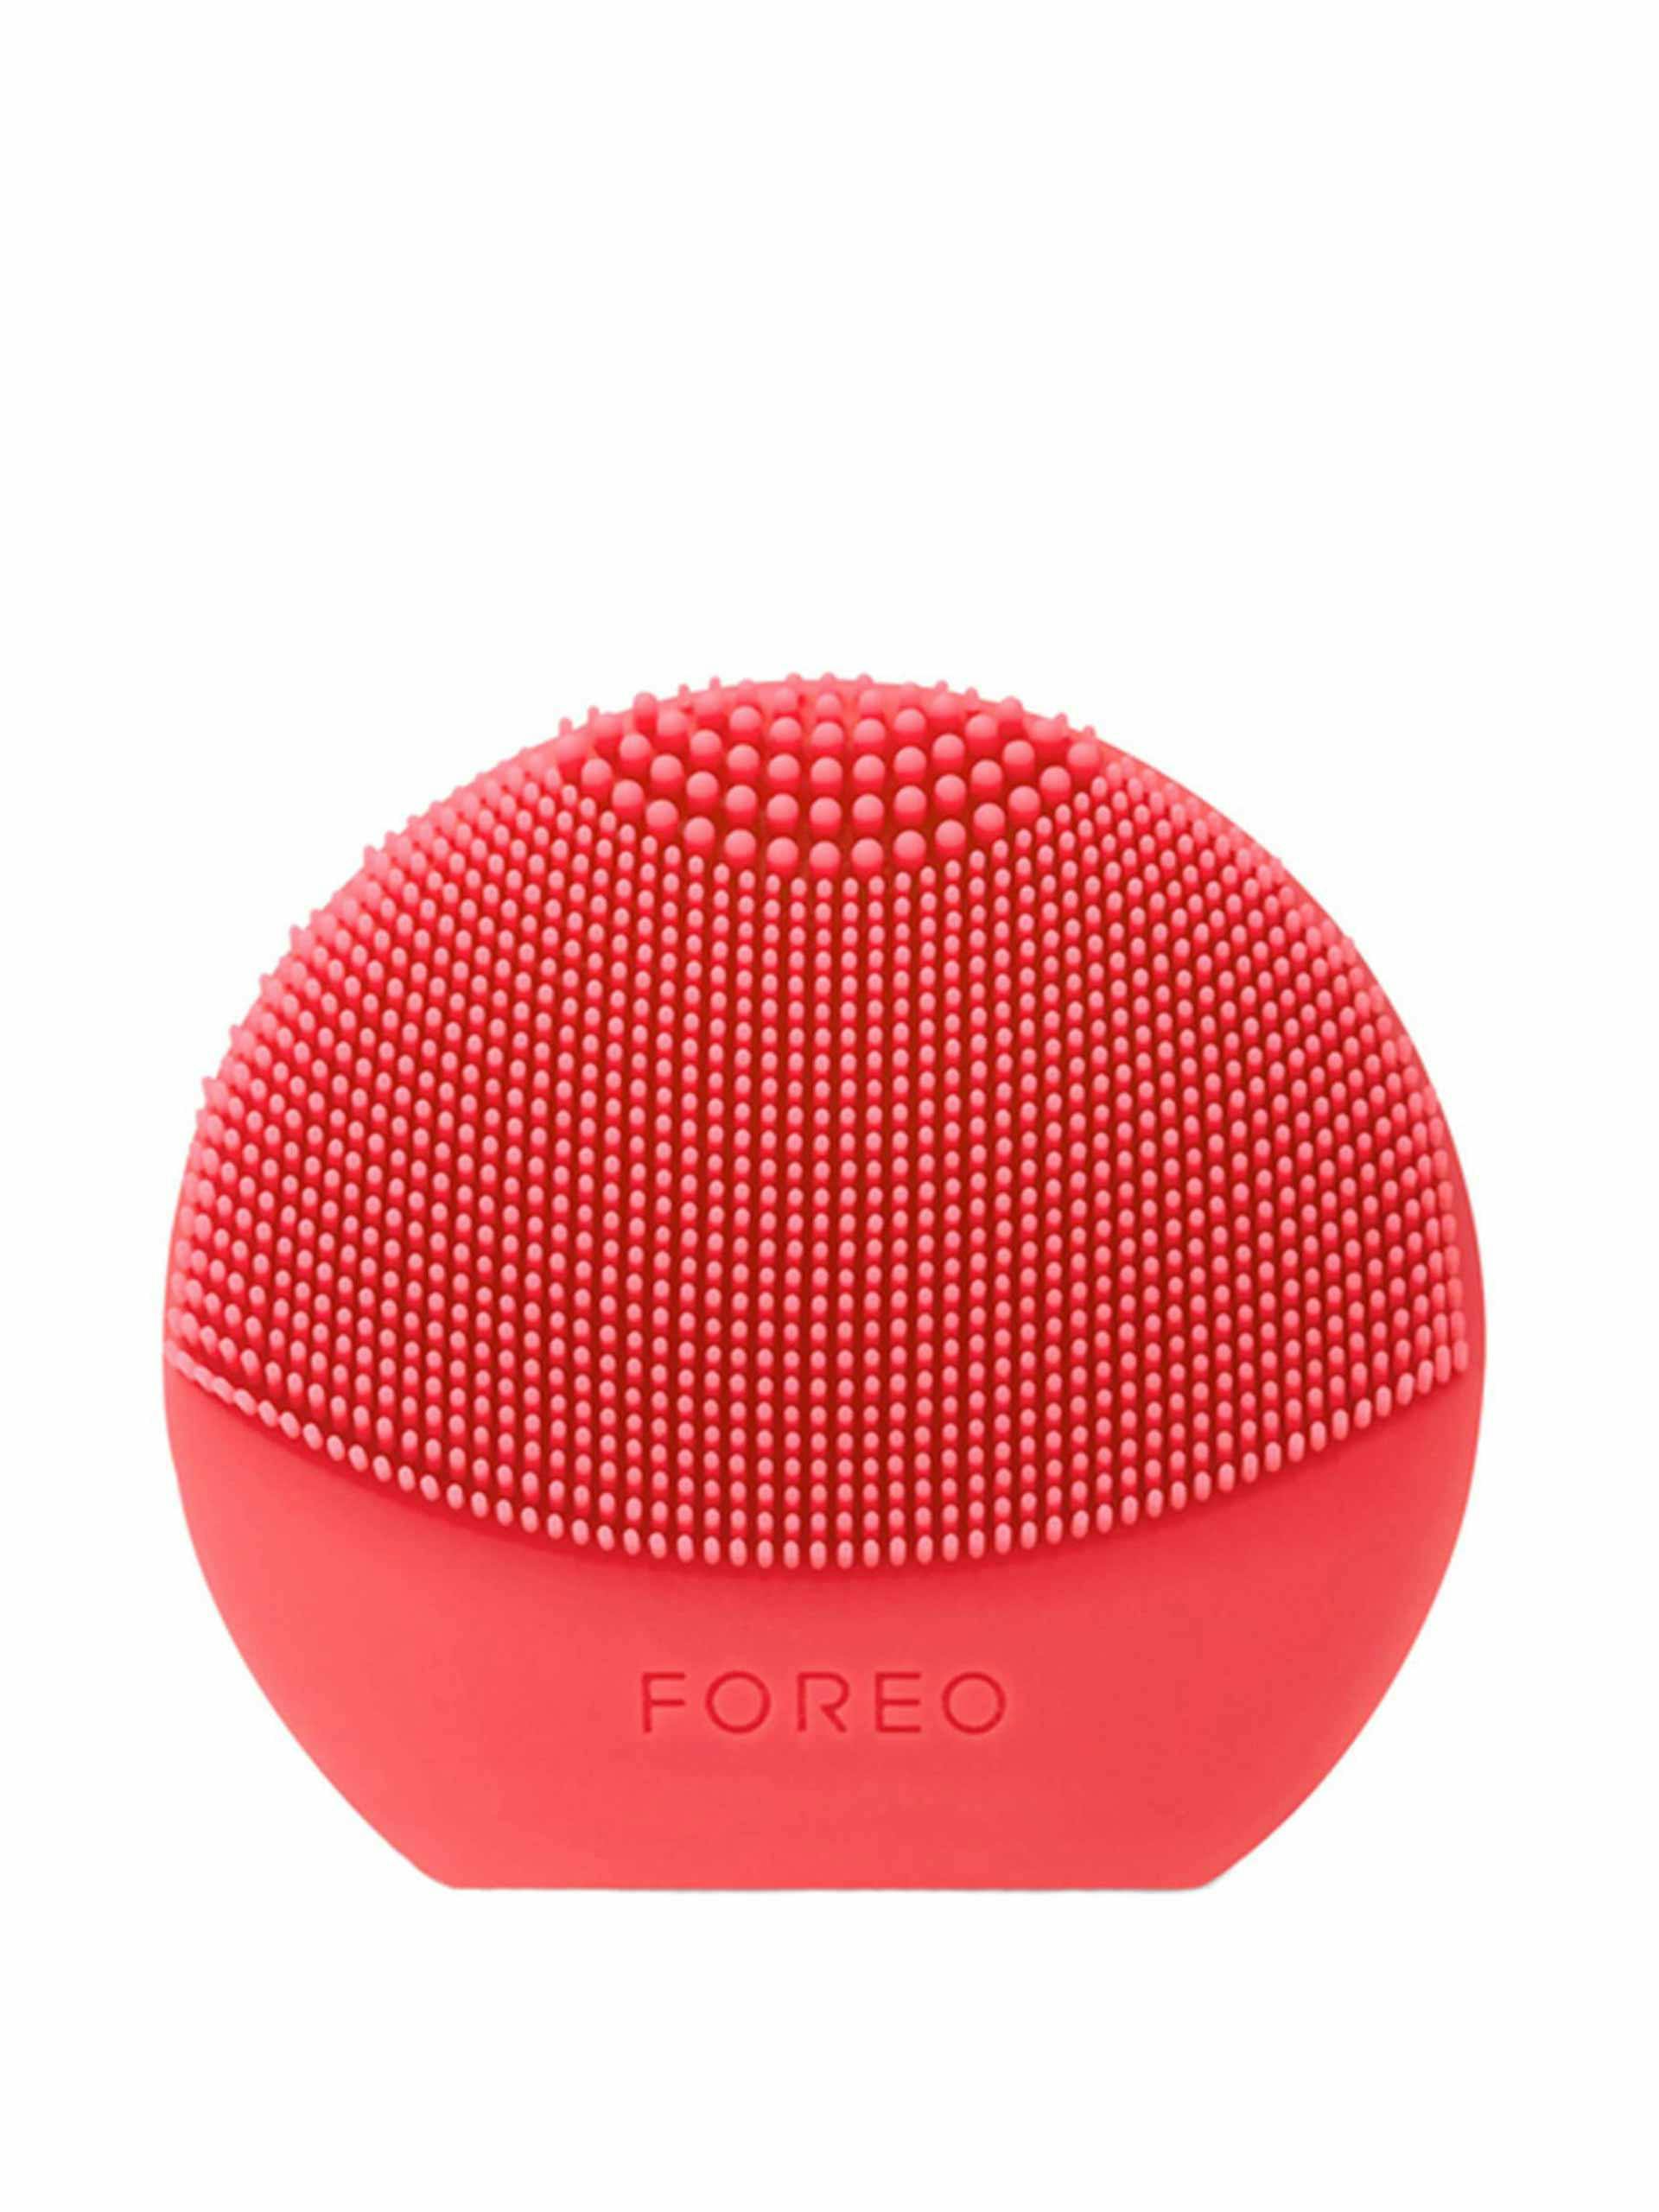 LUNA Play Plus 2 cleansing device